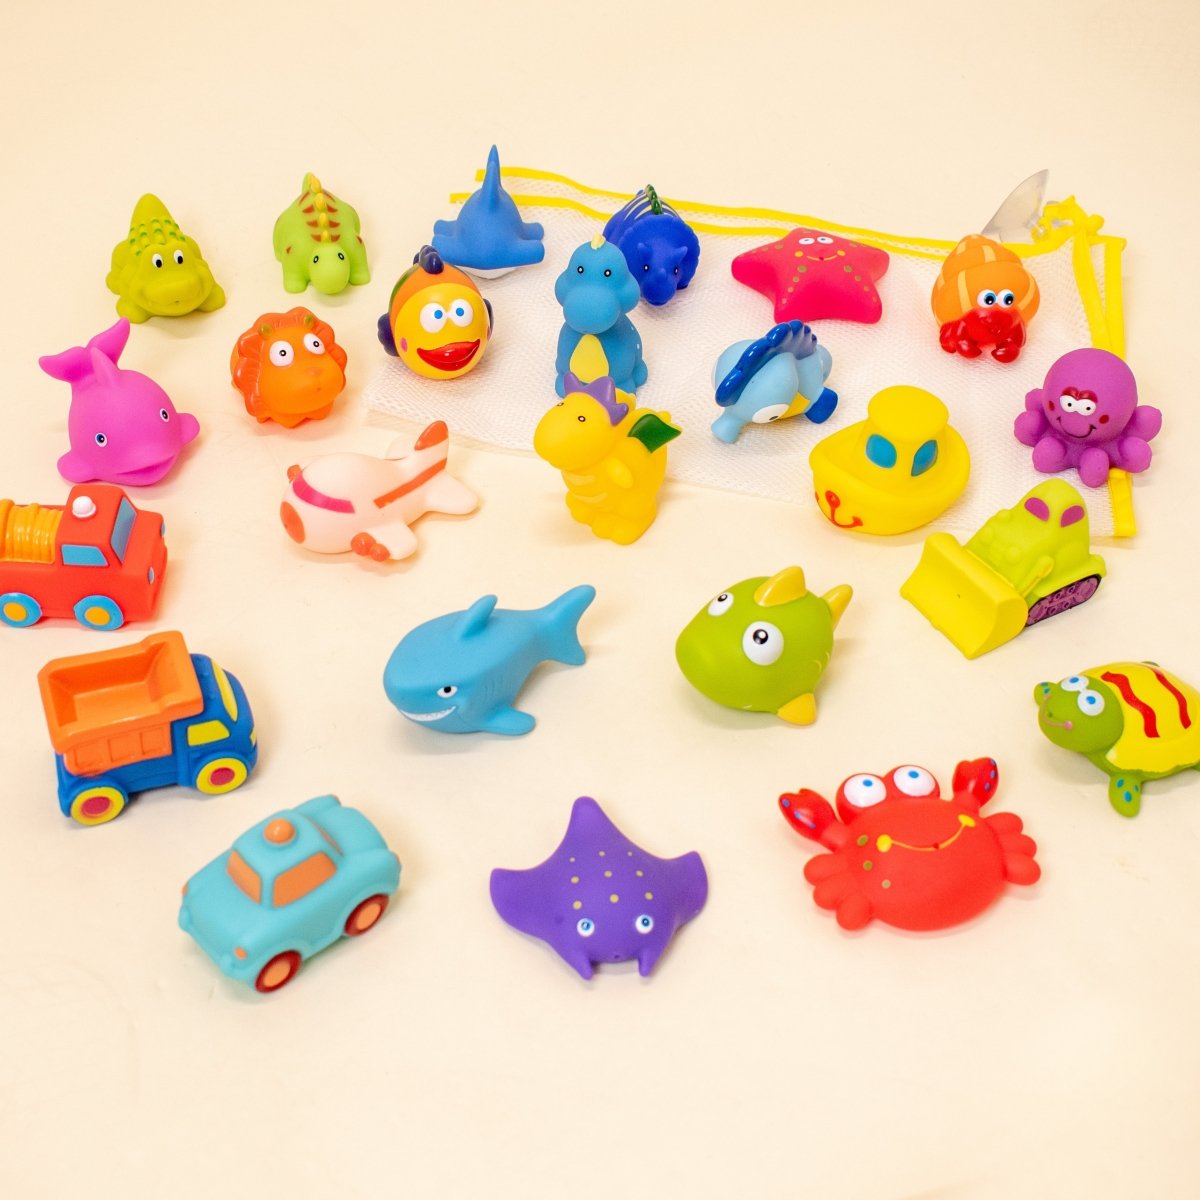 Fun Little Toys 24 Pcs Bath Toys for Toddlers Sea Animals Squirter Toys